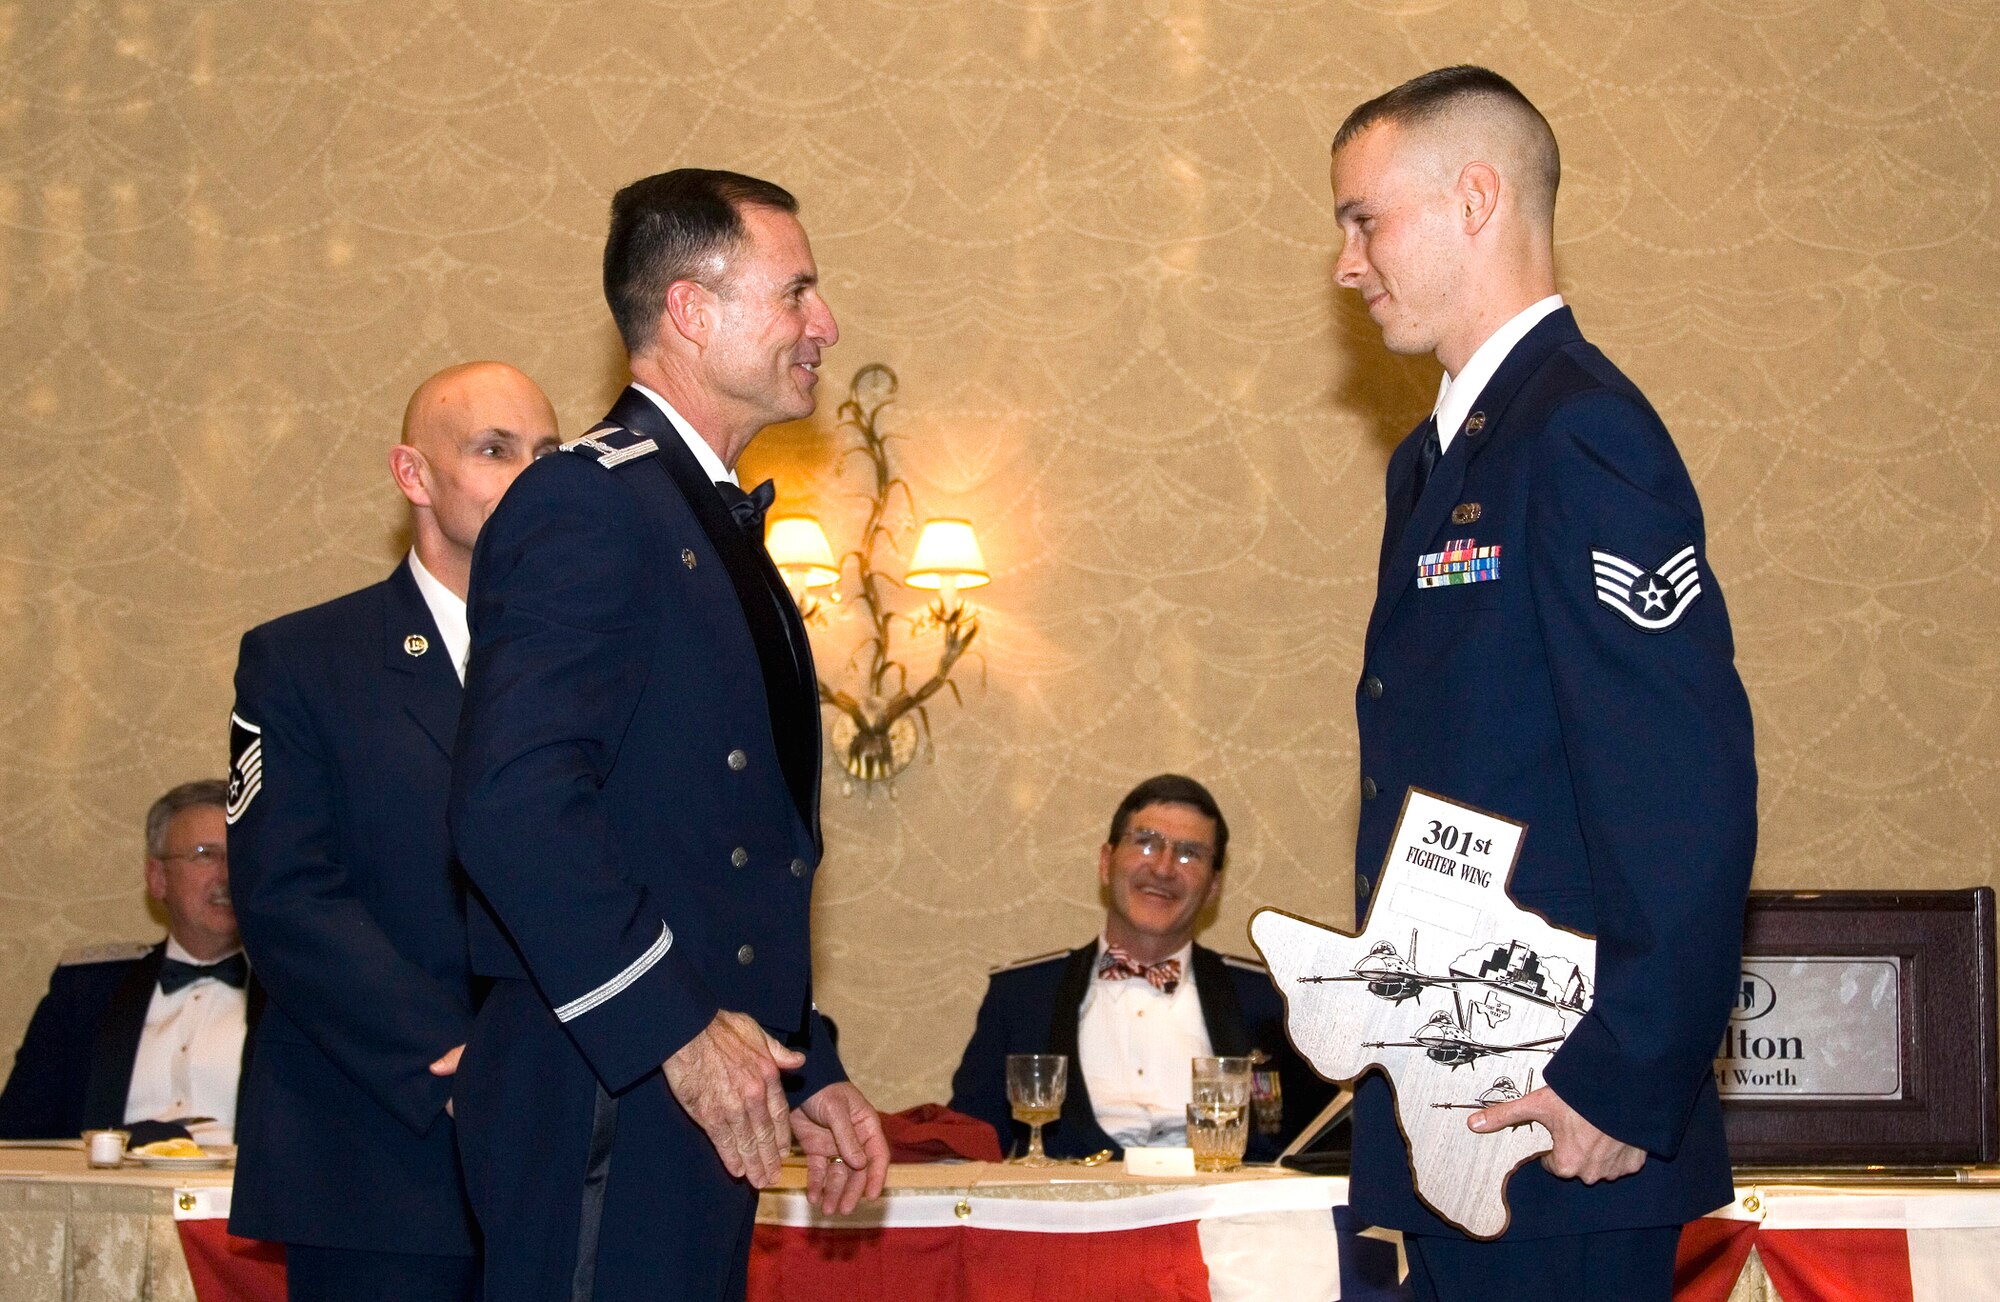 Staff Sgt. Jared Bowen, 301st Aircraft Maintenance Squadron and 301st Fighter Wing Airman of the Year 2006, receives his first of many recognition memorabilia from Col. Kevin Pottinger, 301st FW commander, during the wing's Inaugural Awards Banquet Feb. 3. See page 3 for more banquet photo coverage. (U.S. Air Force Photo/Staff Sgt. Jason Costantino)